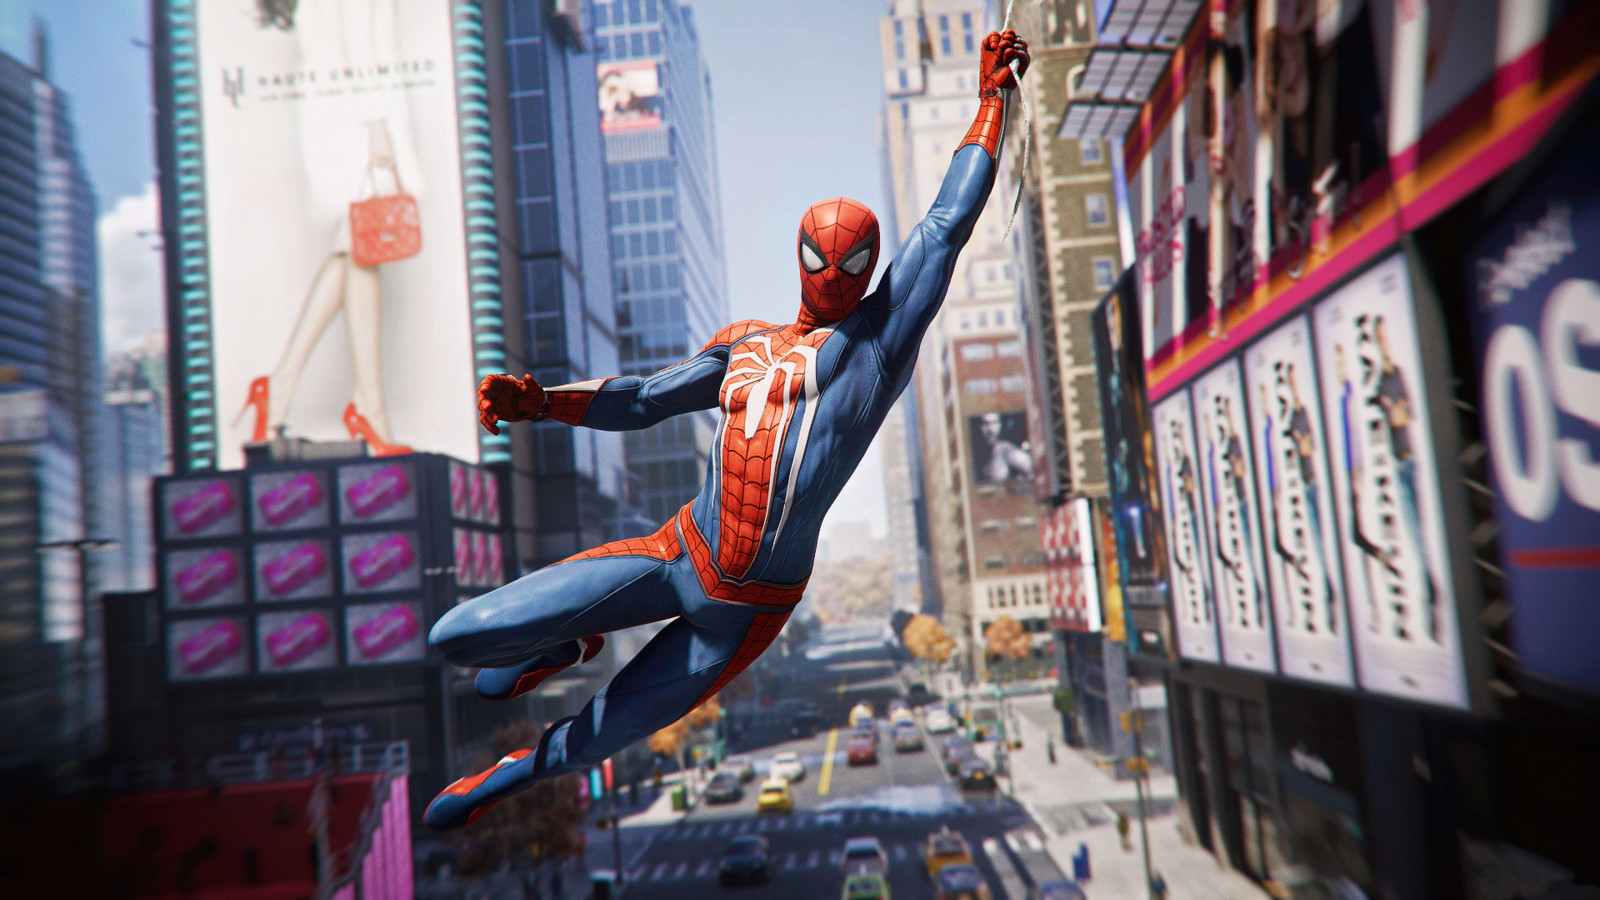 Download wallpaper: Spider Man from the video game 1600x900